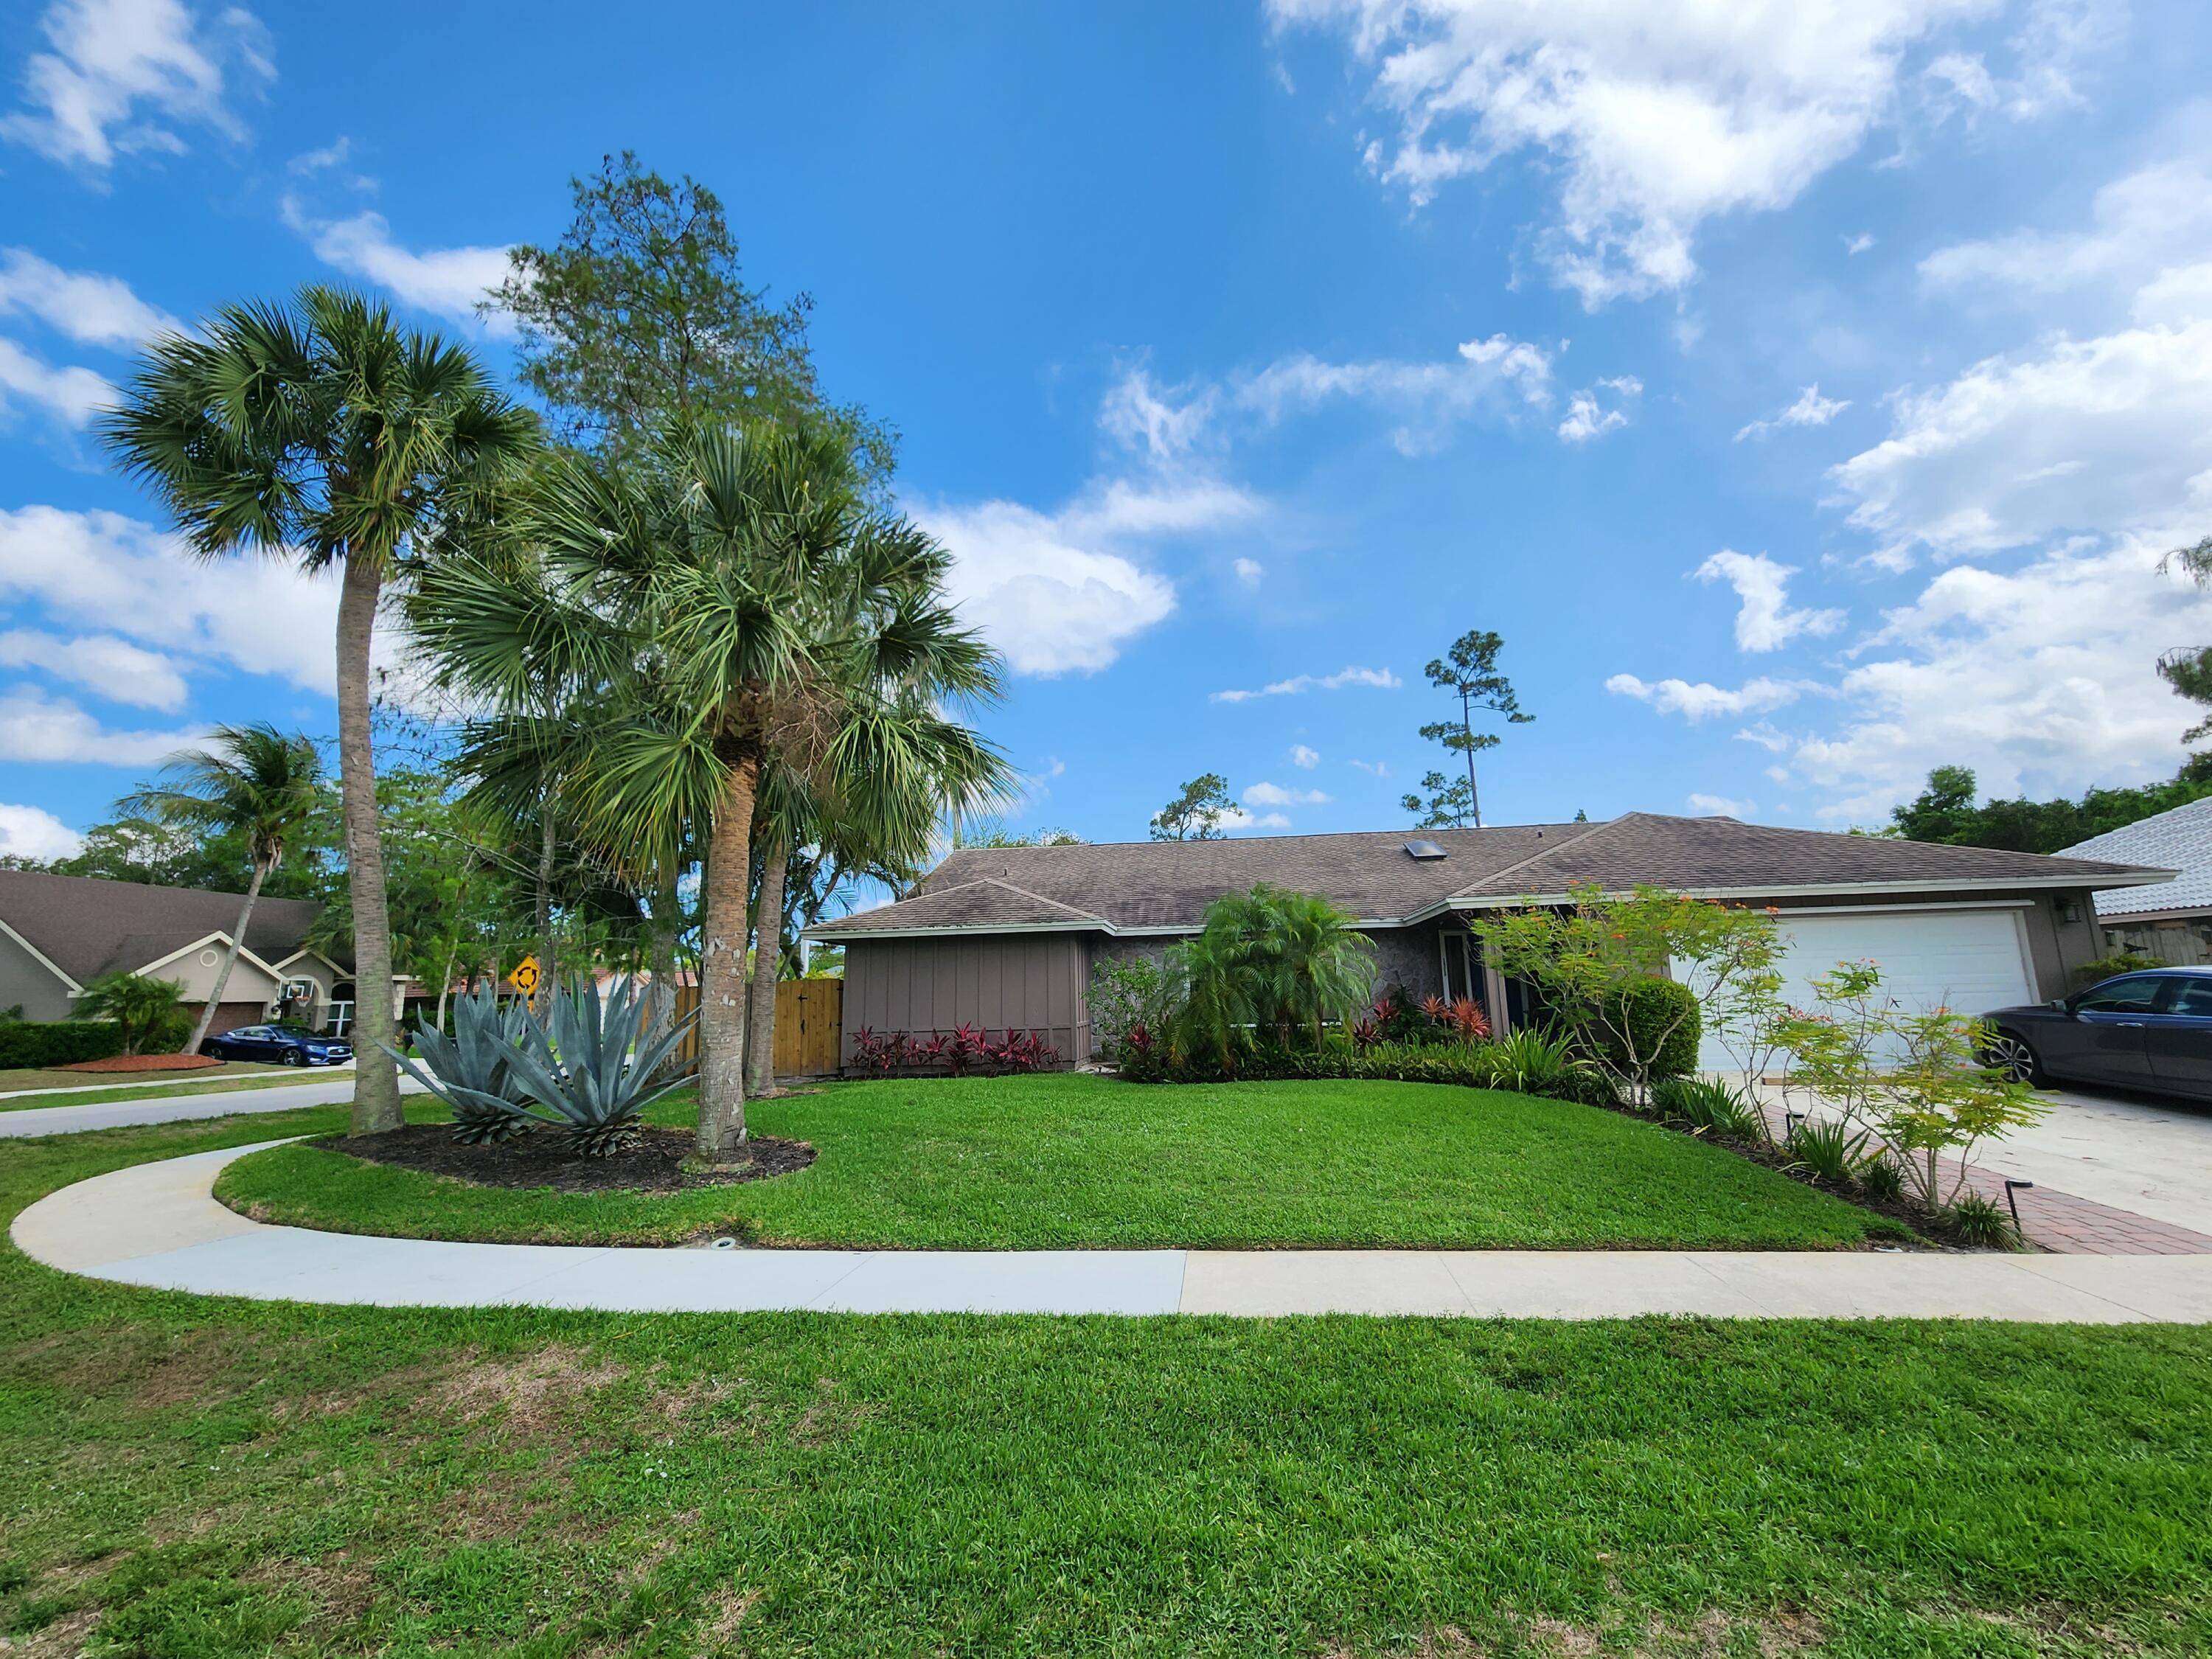 Wellington Seasonal, 3 2 corner lot home with fenced yard and pool in Sugar Pond Manor, just a few short mins from WEF, Shopping and Dining.